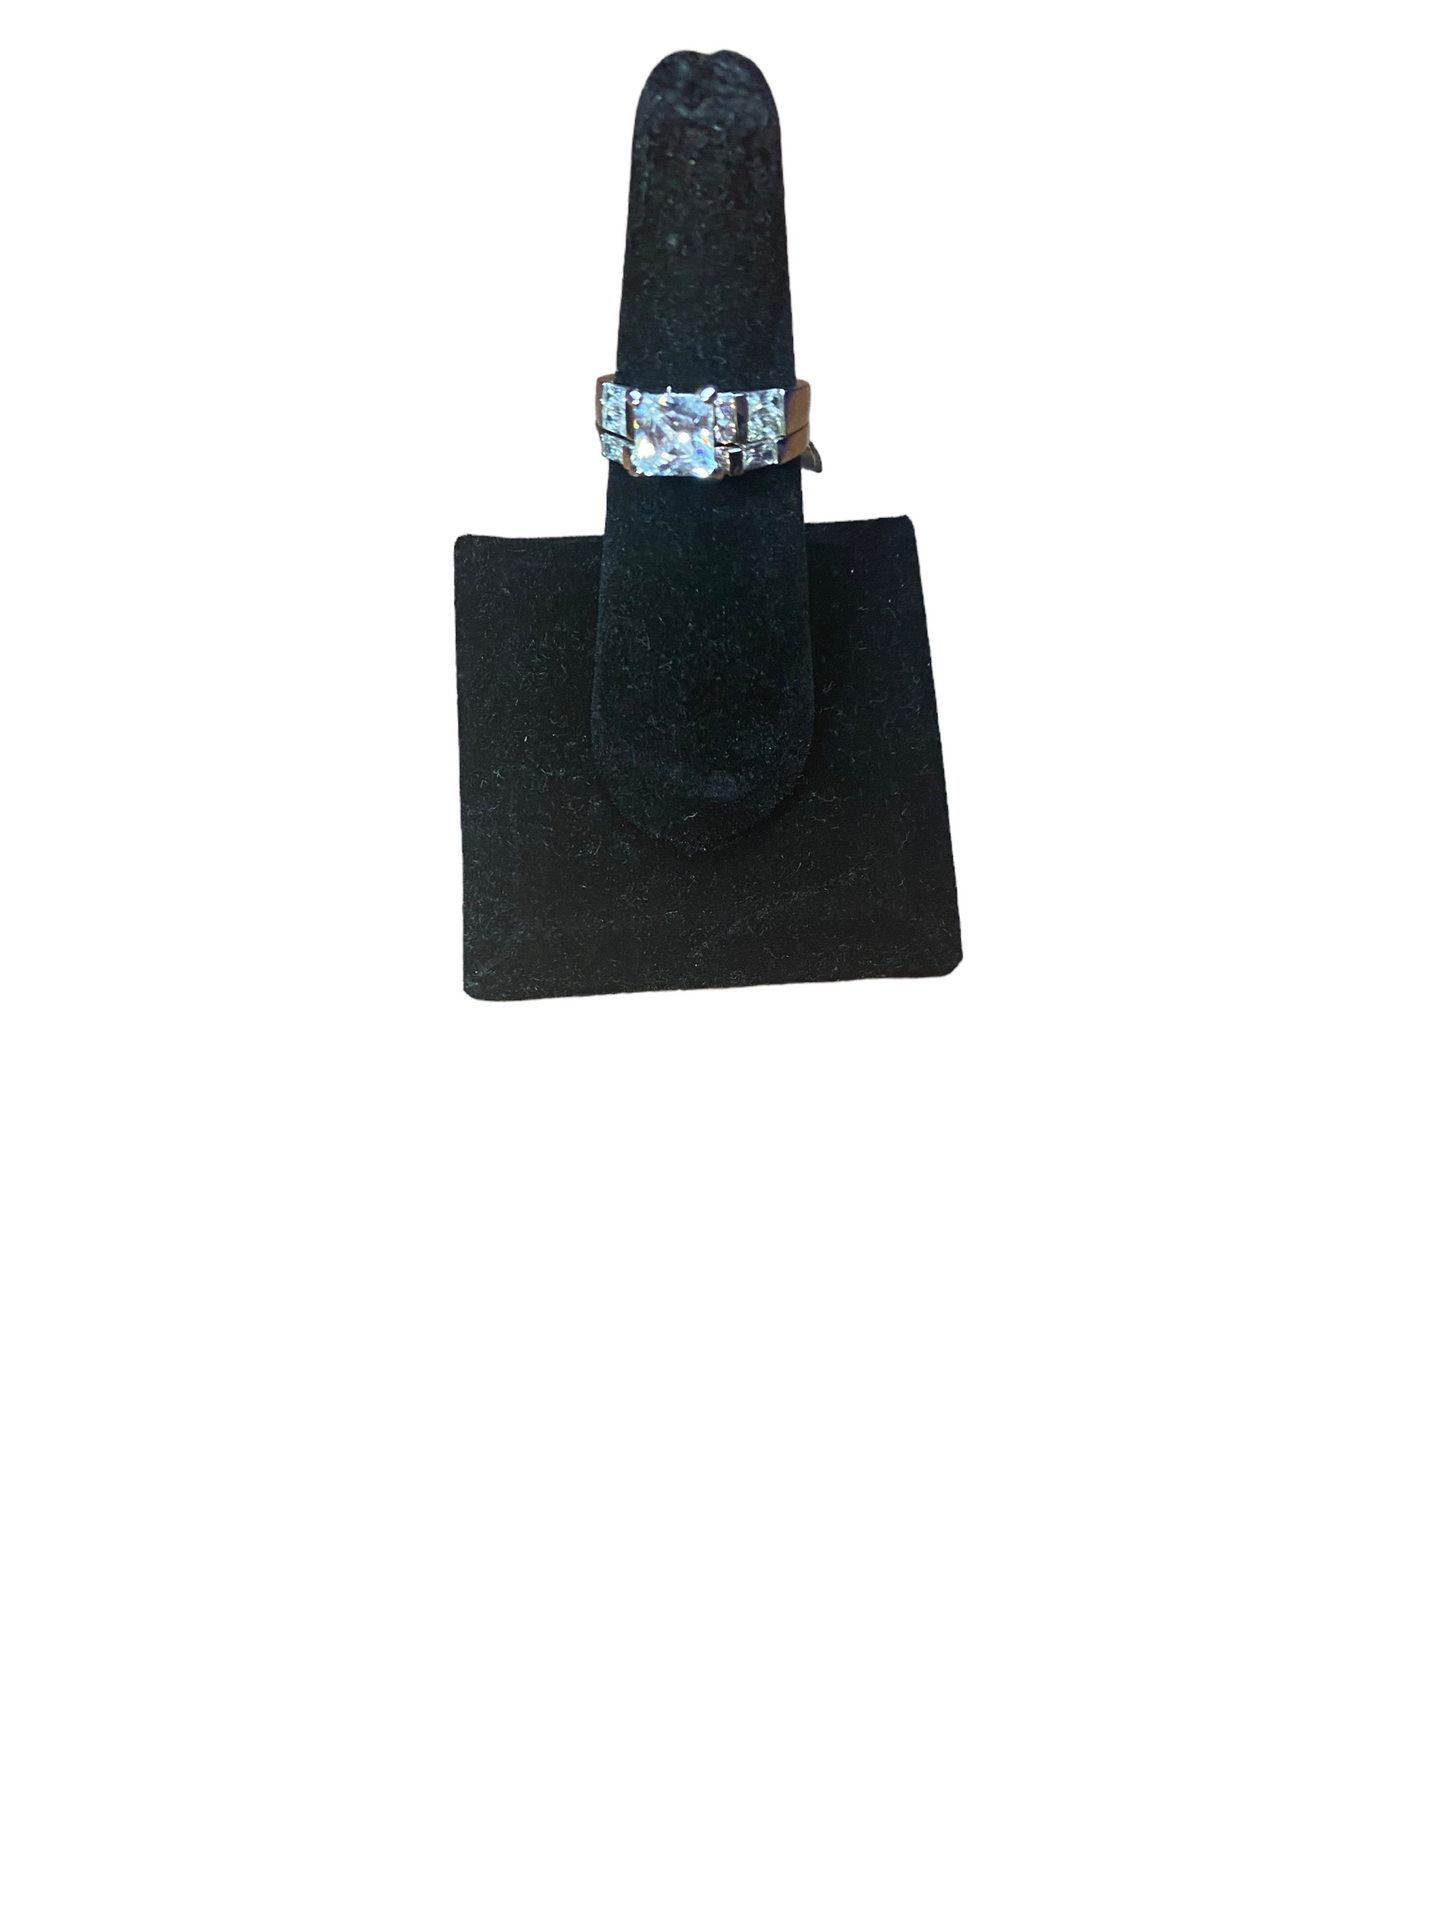 Misty Blue Cubic Zirconia Double Ring